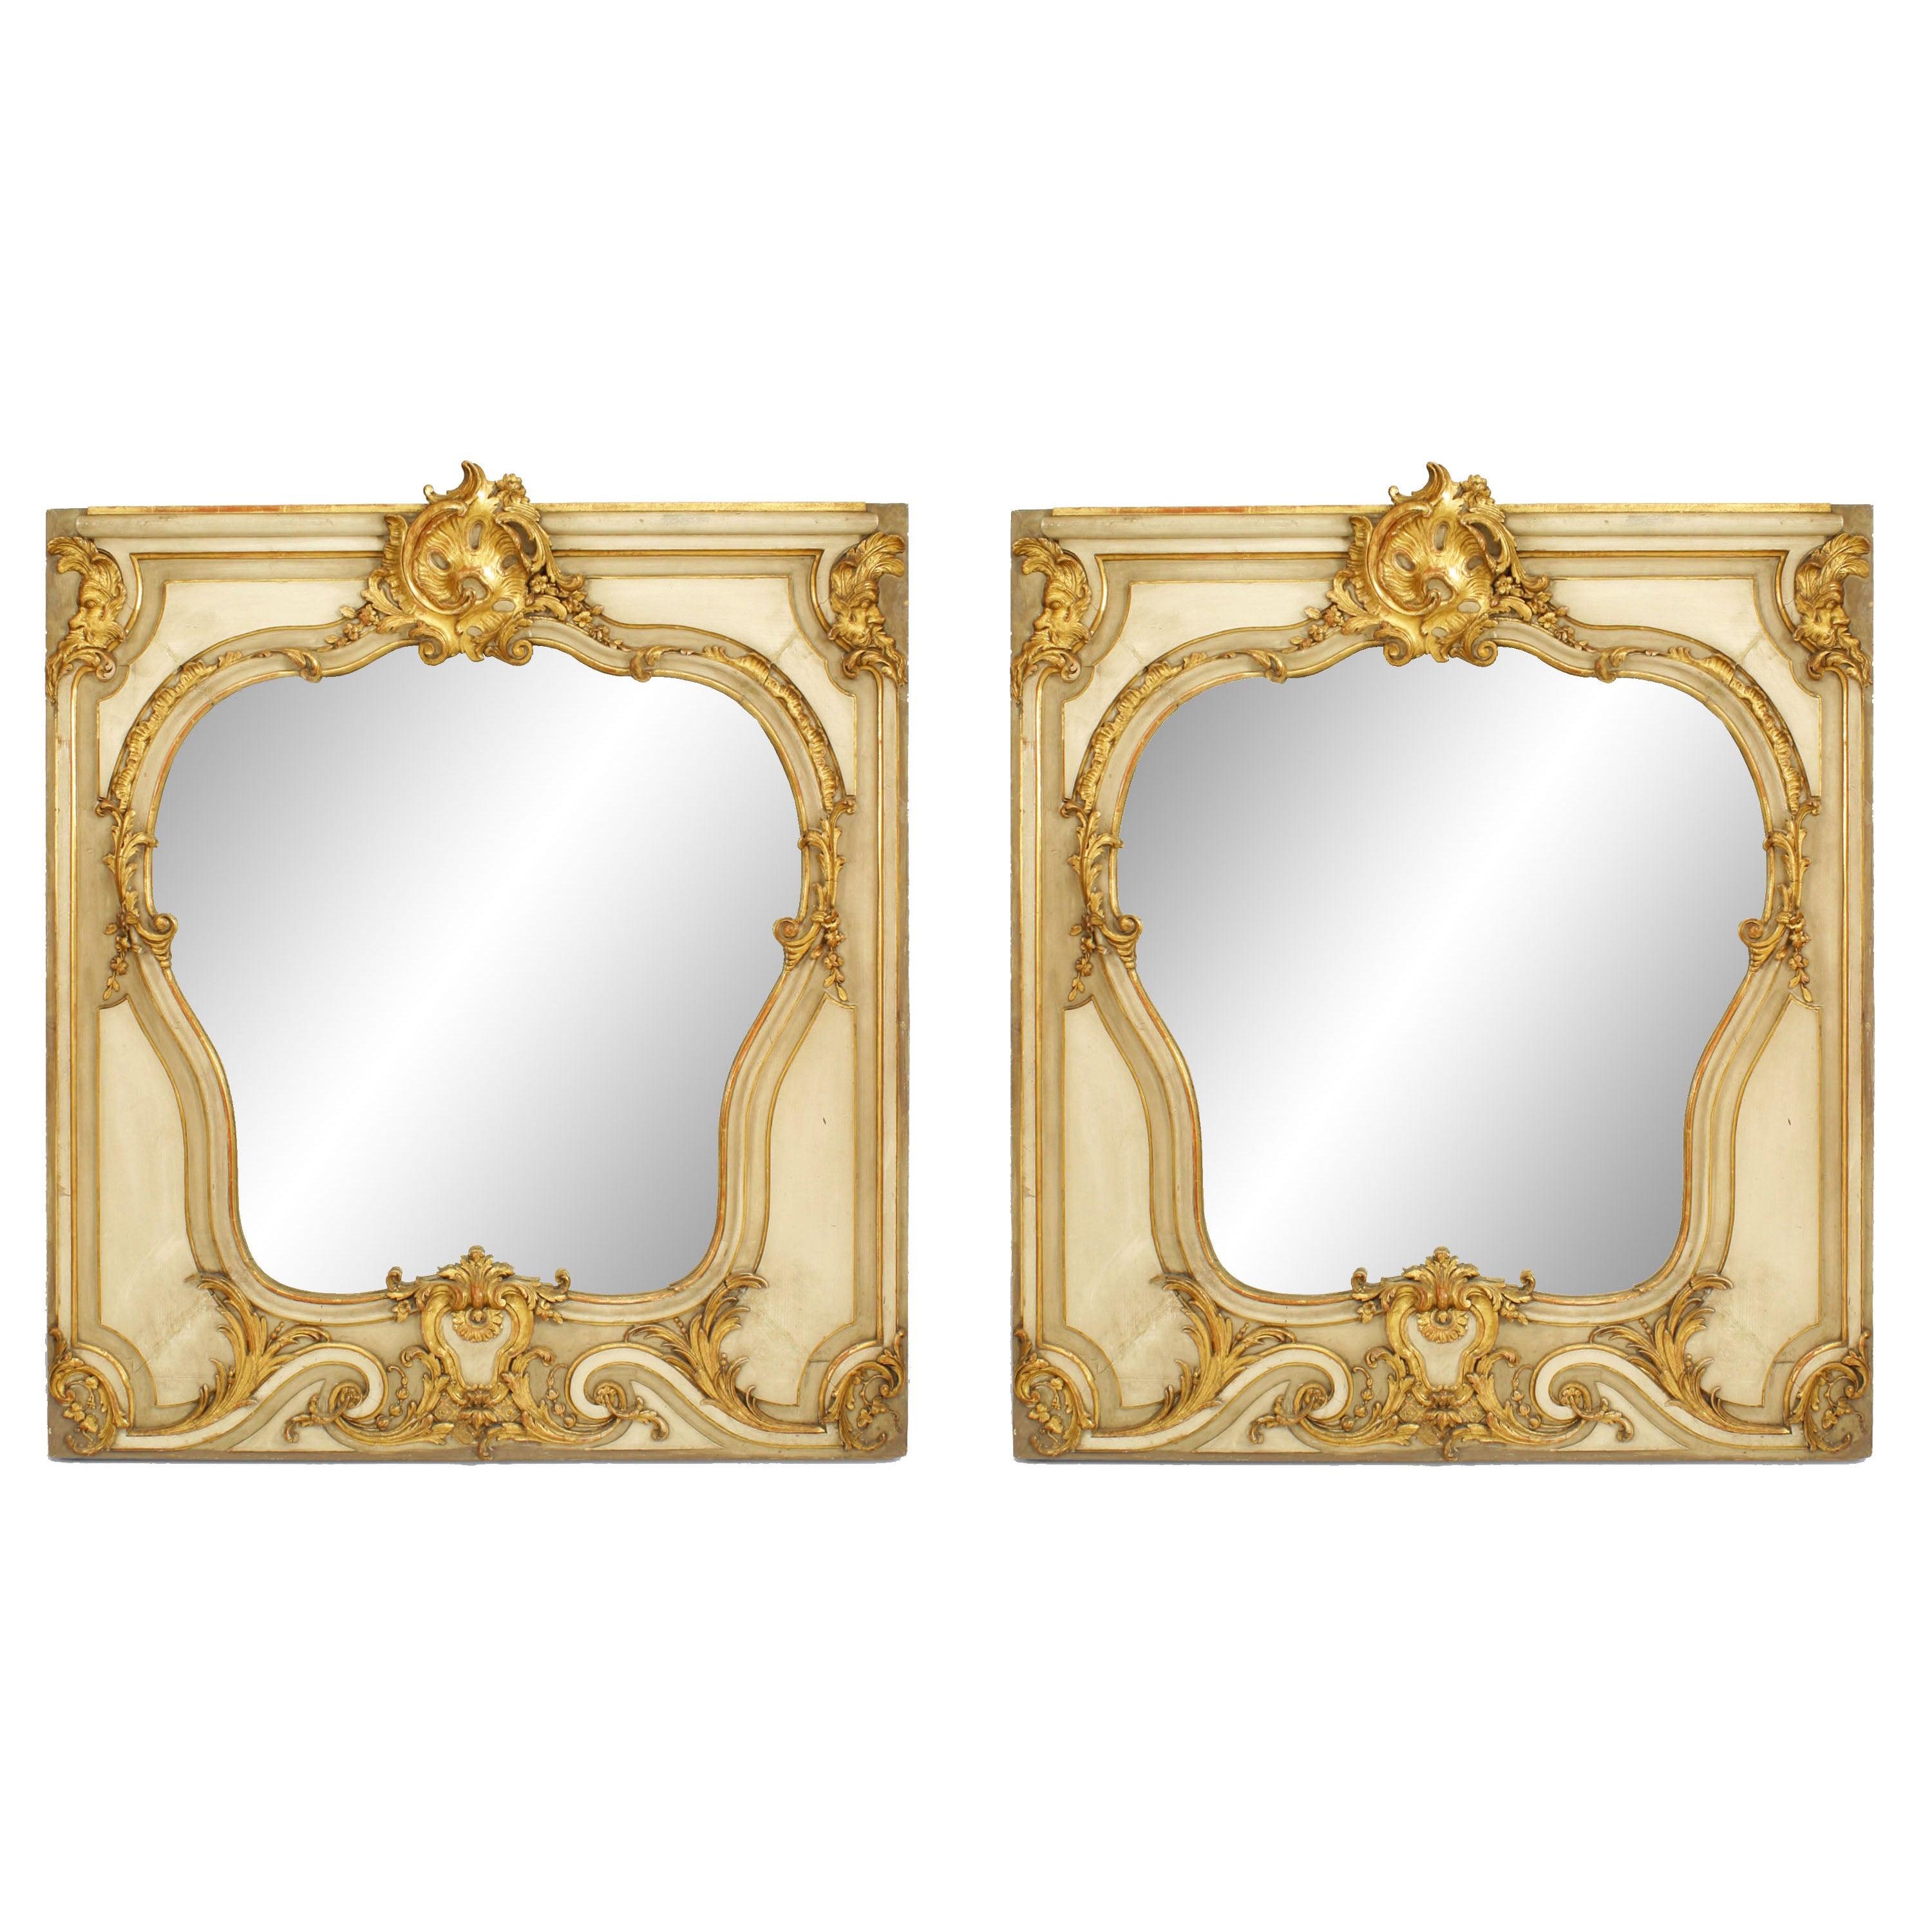 Pair of French Louis XV Style Gilt and Beige Painted Wall Mirrors